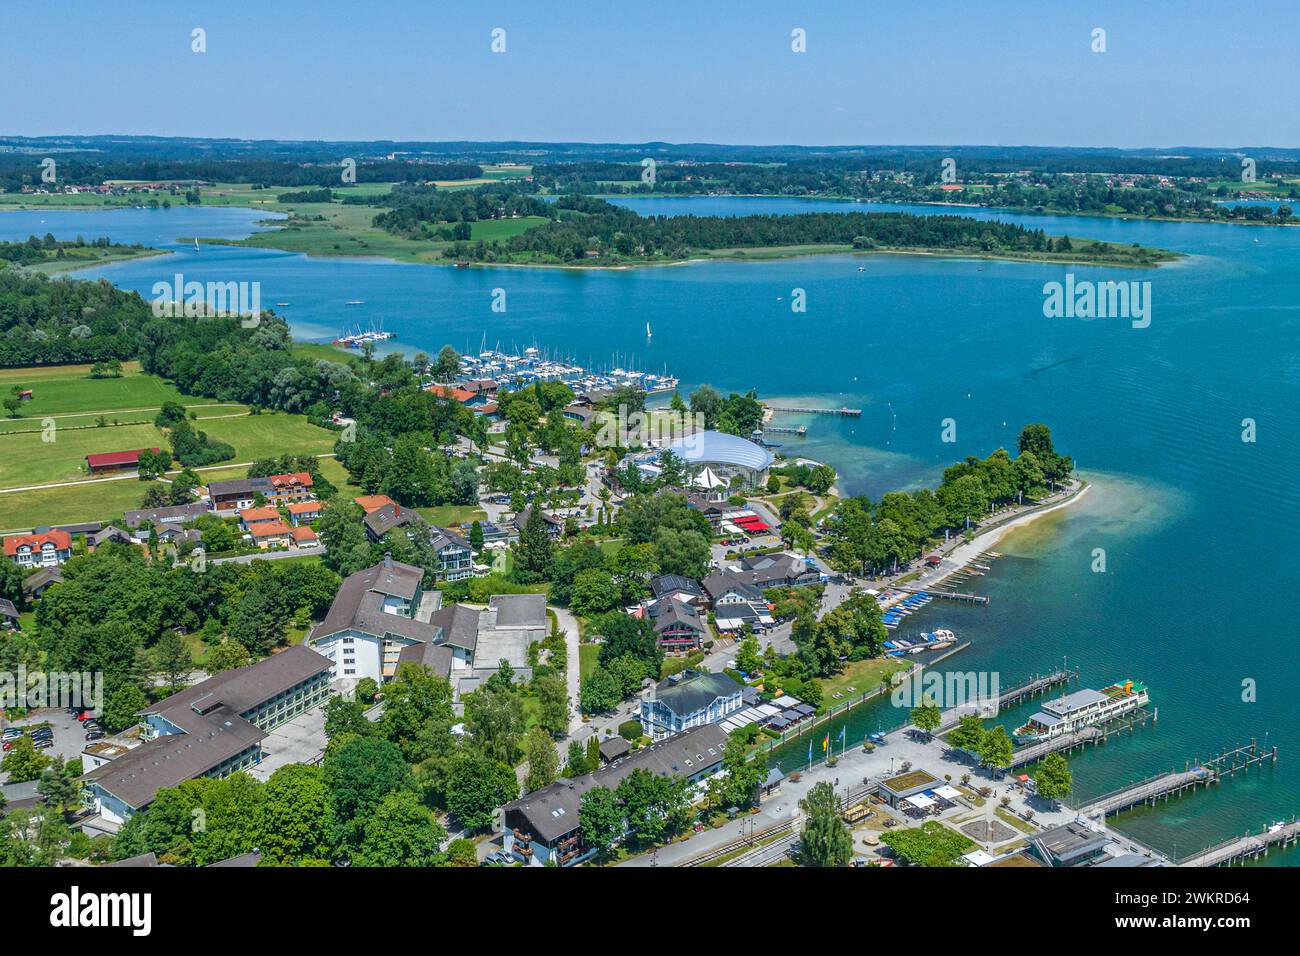 Summer in Chiemgau around the shores of Lake Chiemsee near Prien-Stock Stock Photo